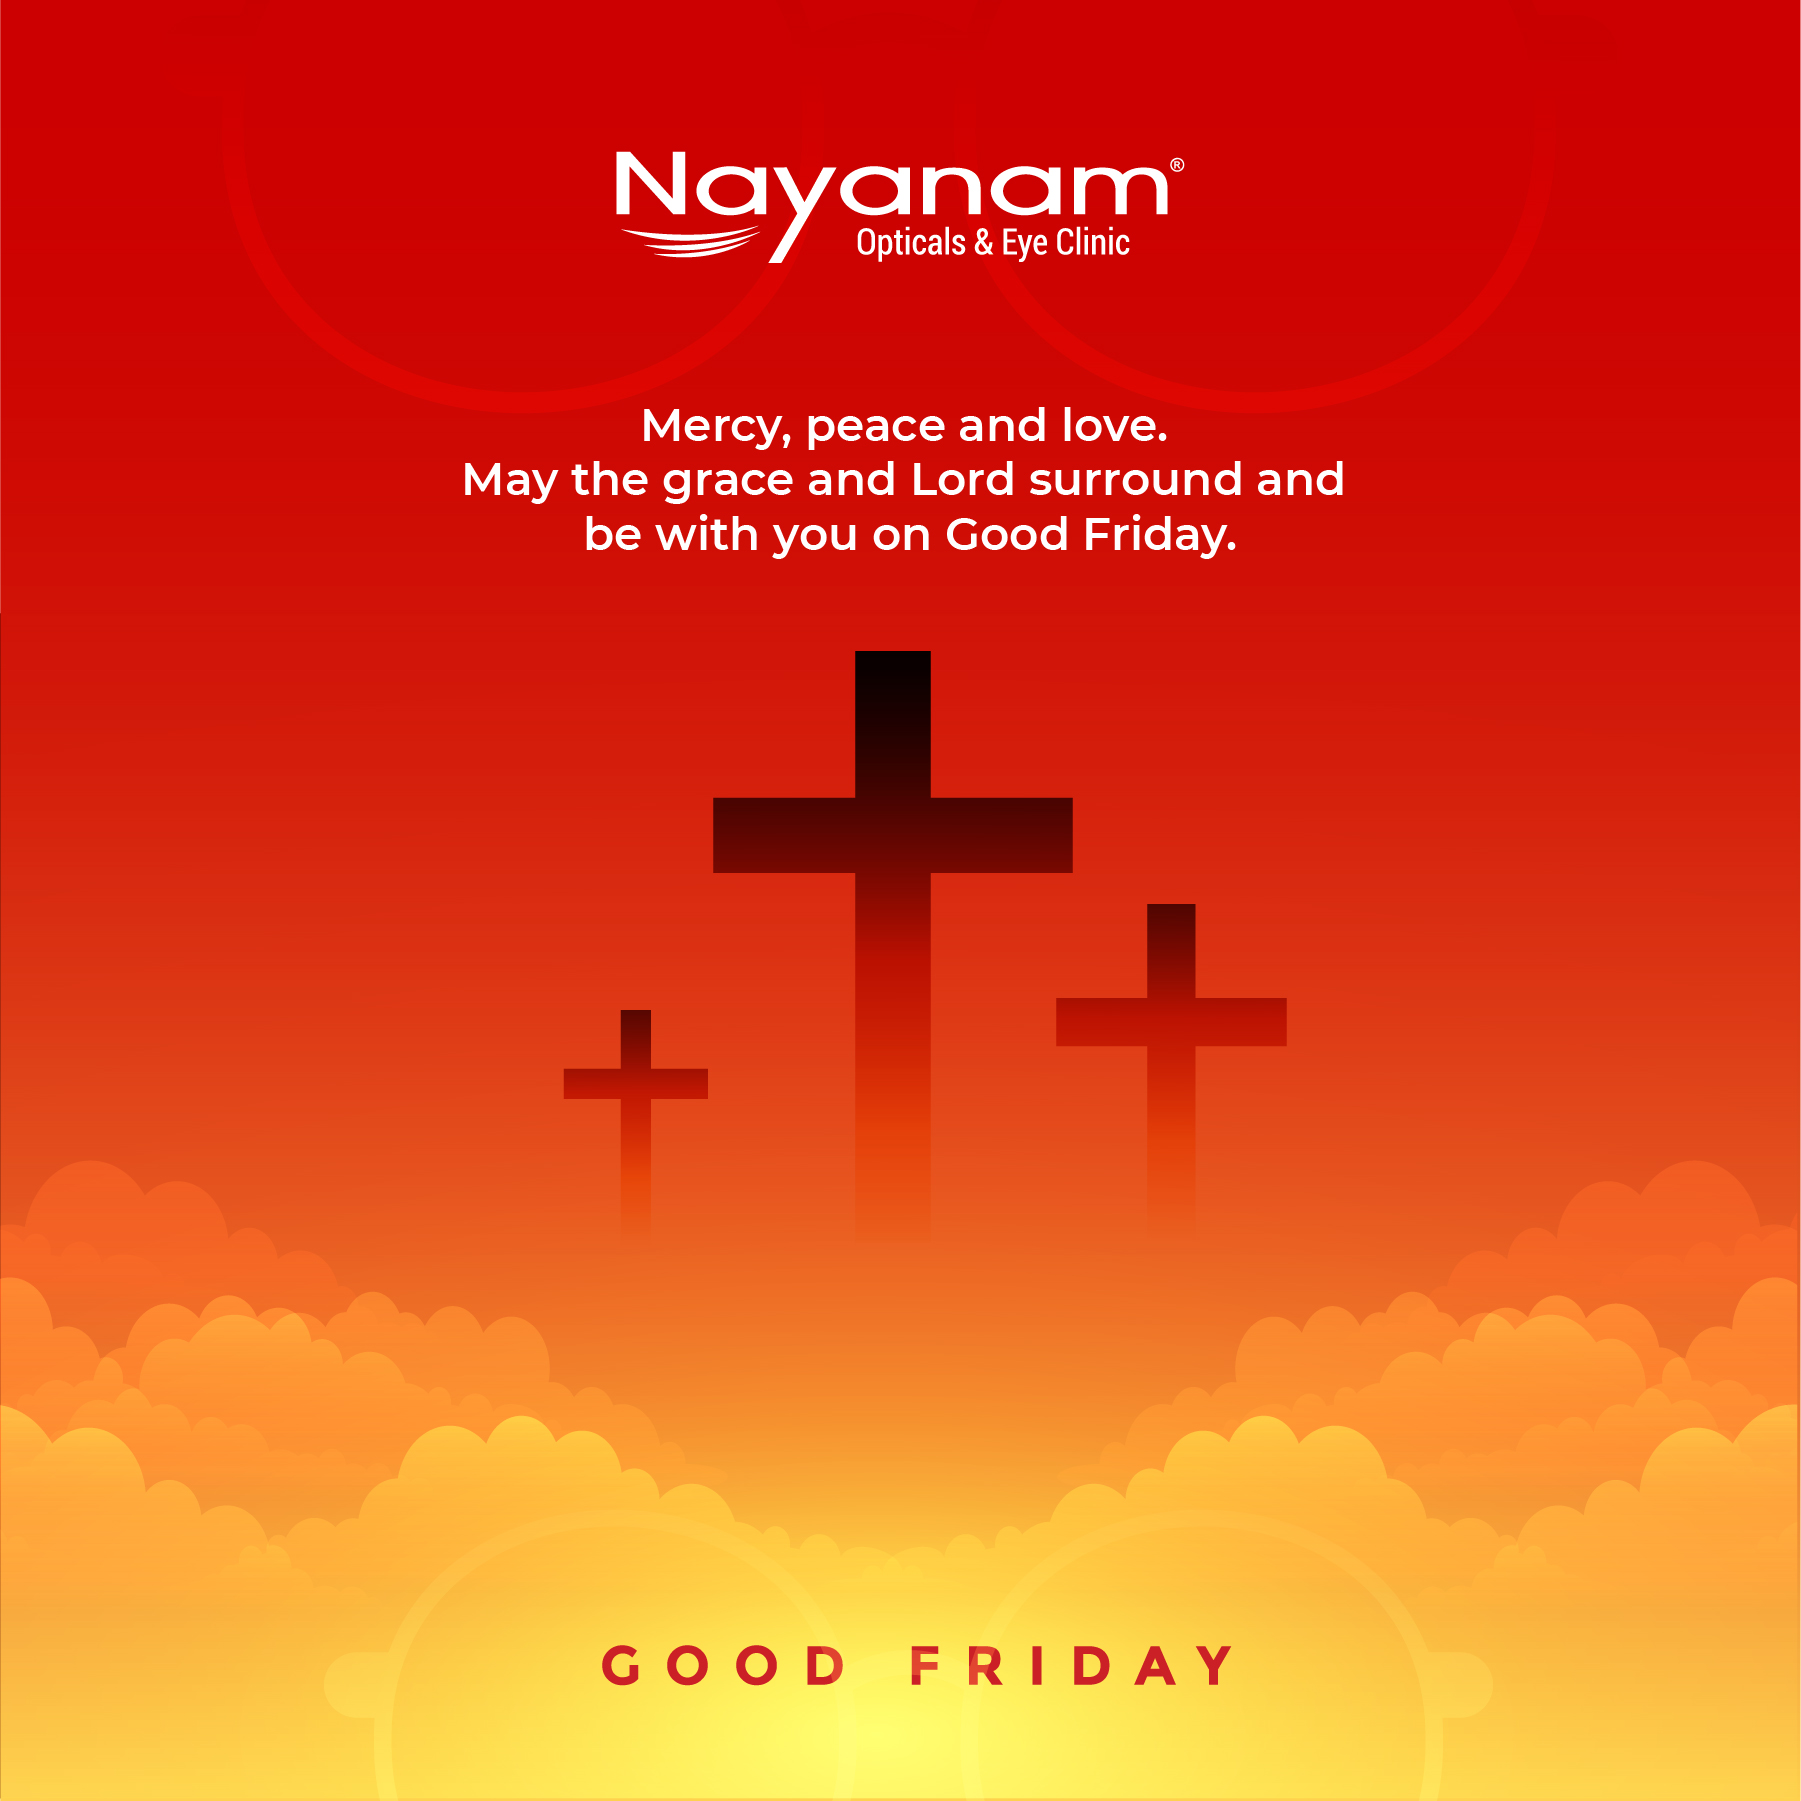 Good Friday wishes from Nayanam Opticals And Team